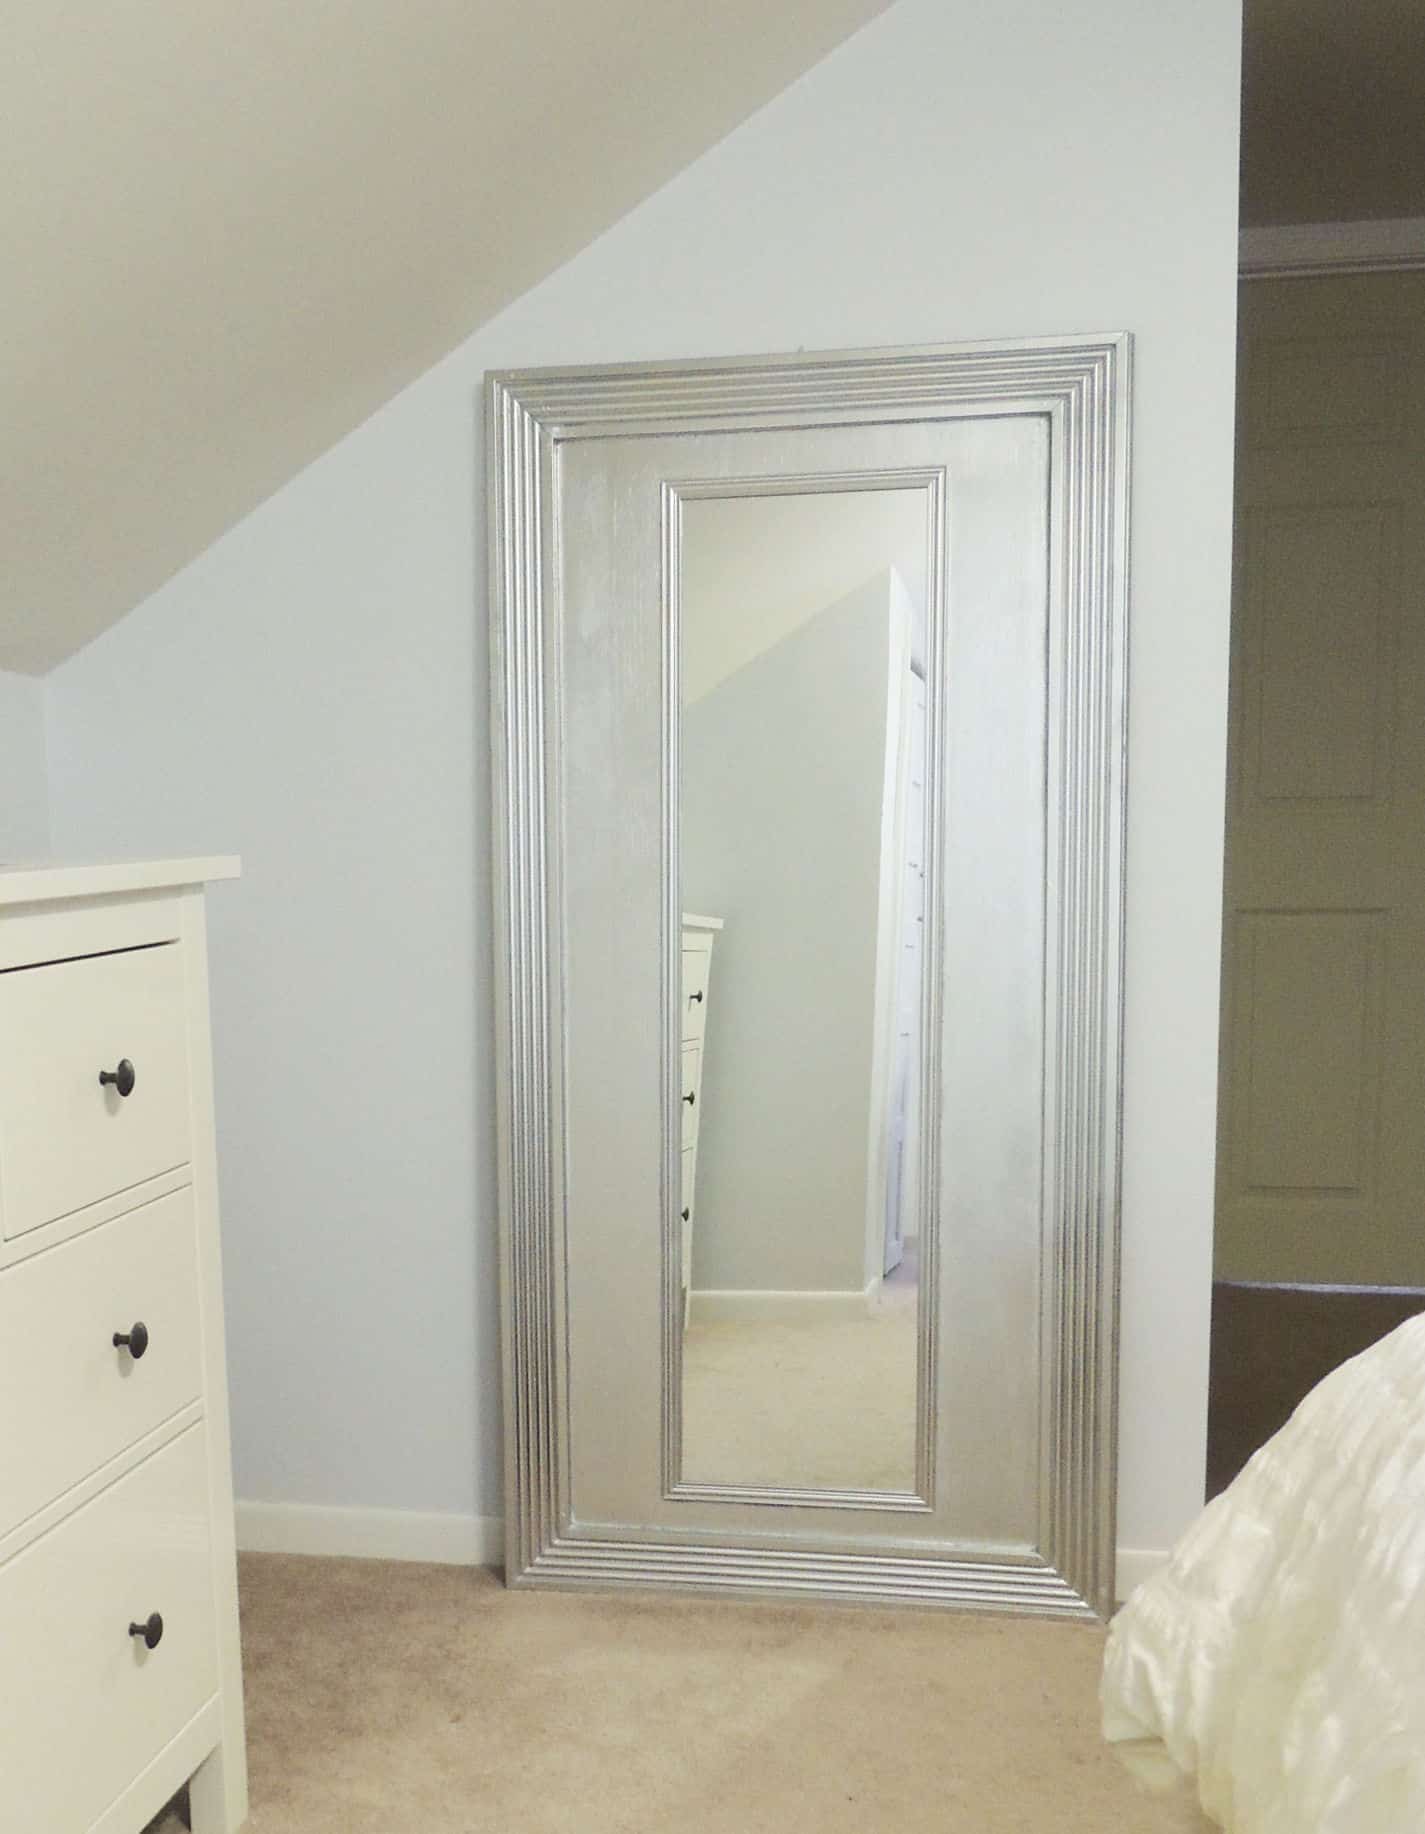 A large, floor-length silver mirror leaning against a light blue wall